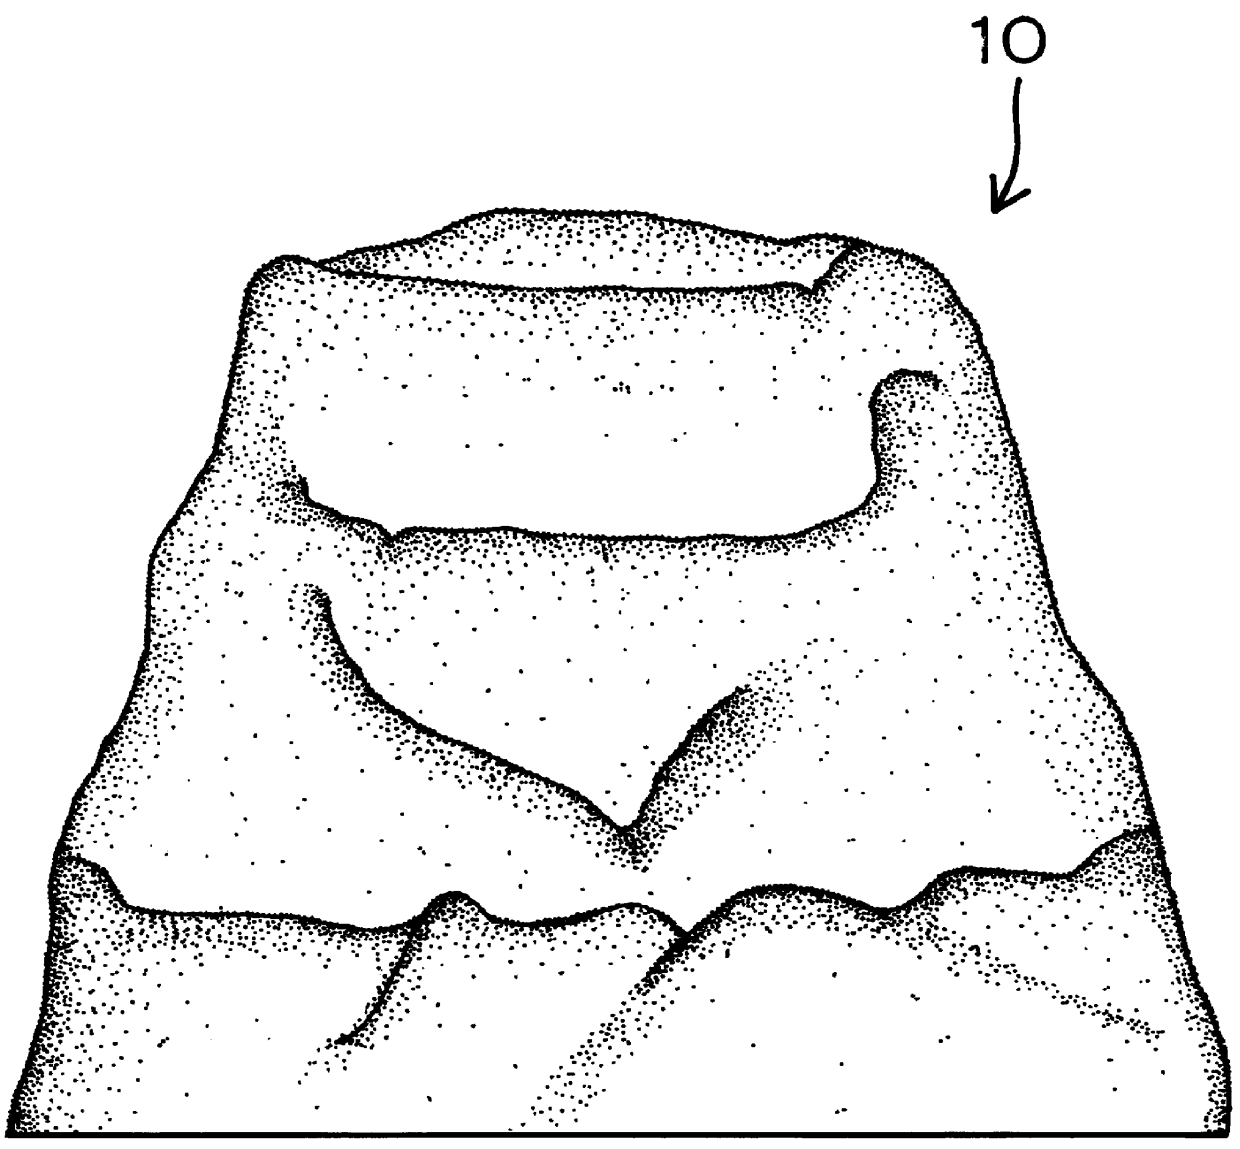 Simulated rock and method of making same